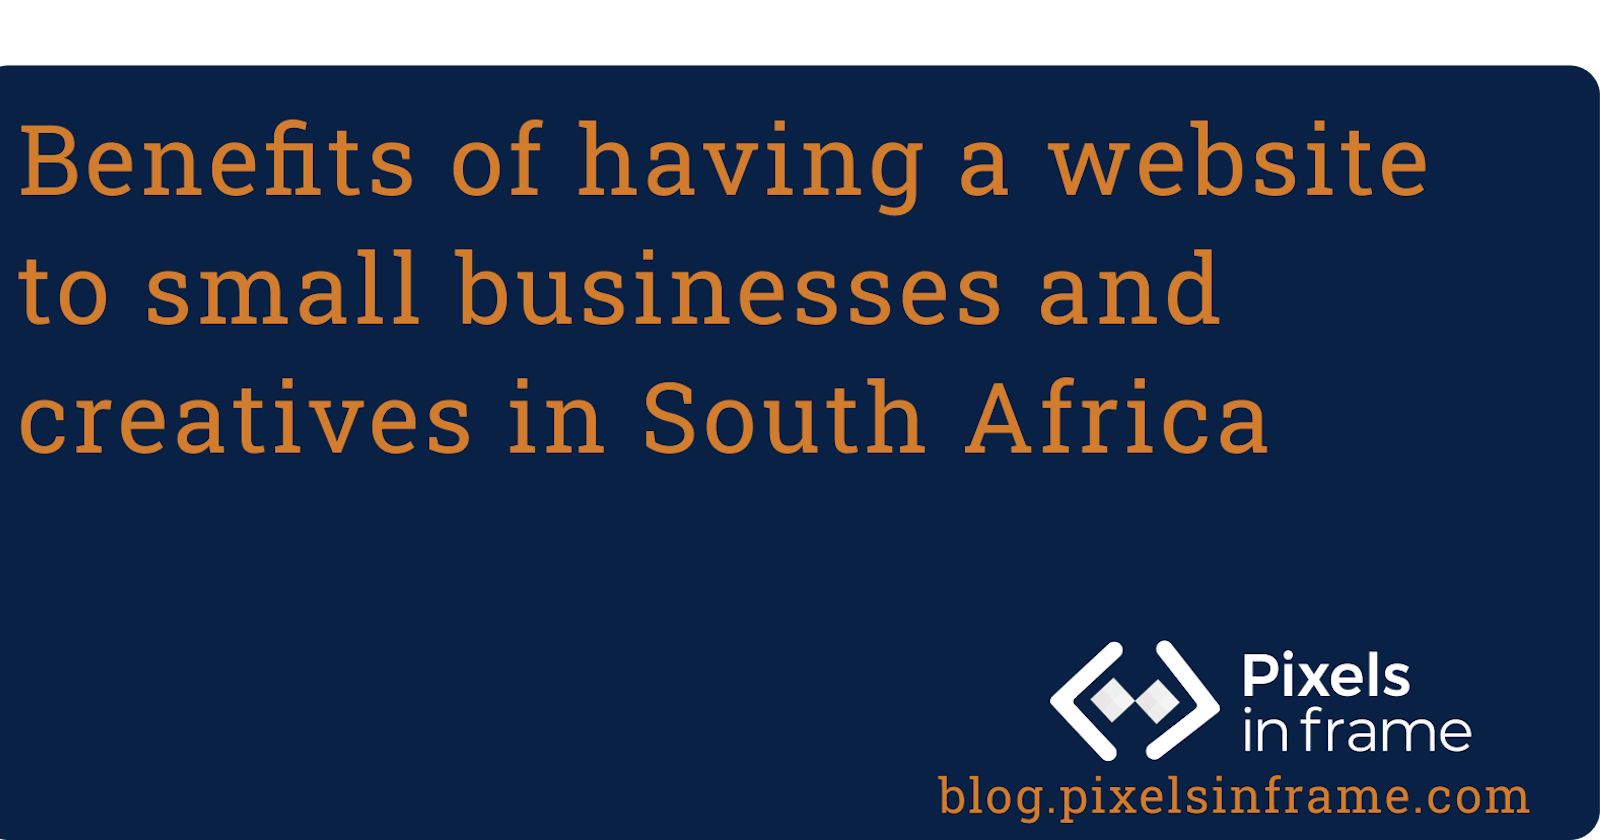 Benefits of a website to small businesses and creatives in South Africa